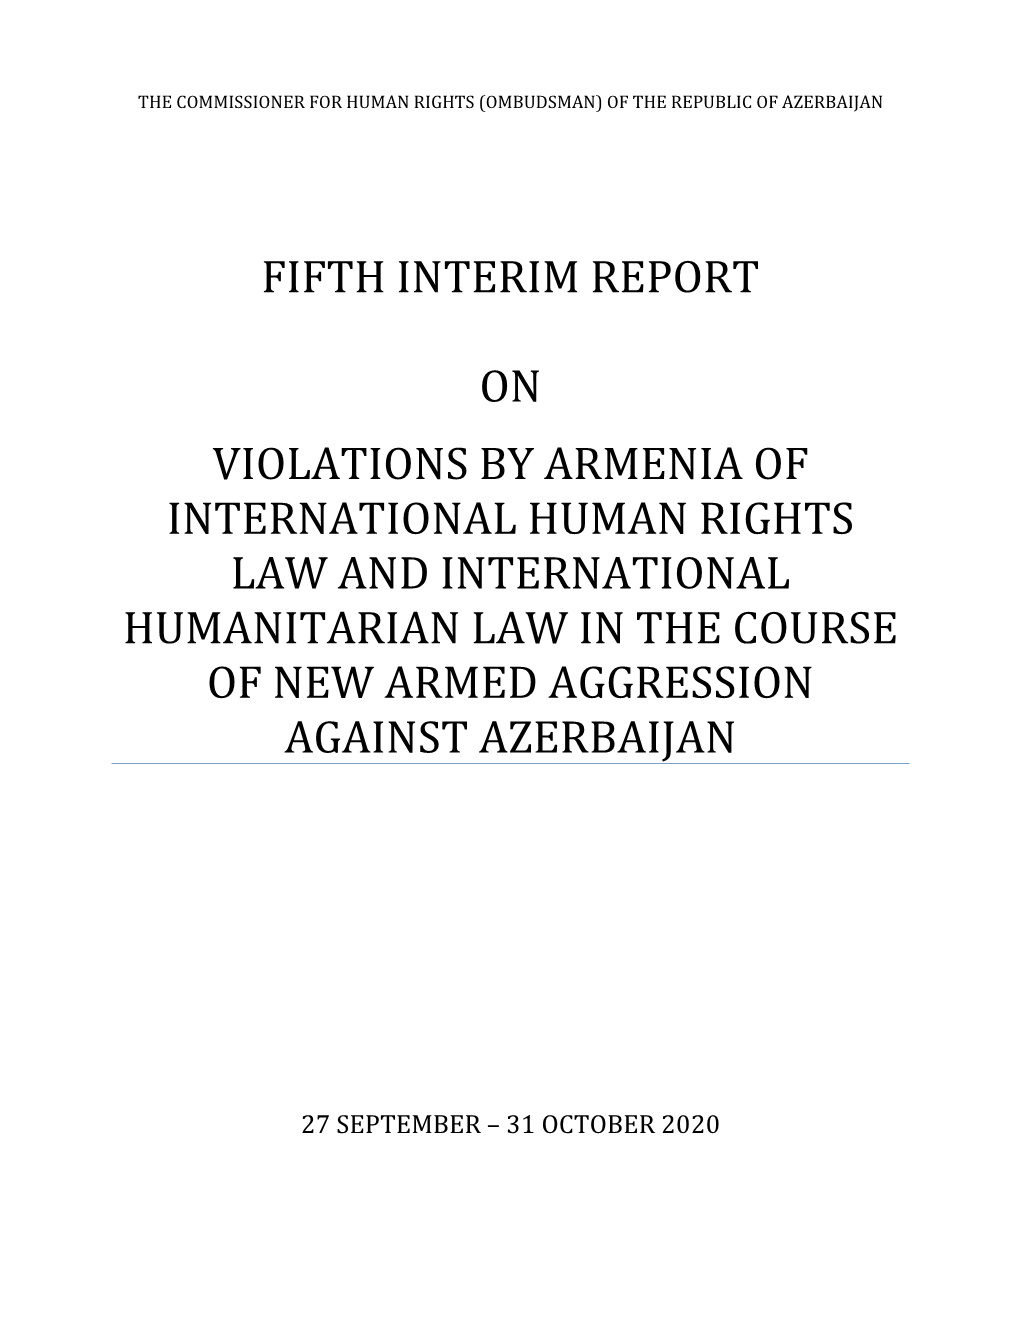 Violations by Armenia of International Human Rights Law and International Humanitarian Law in the Course of New Armed Aggression Against Azerbaijan